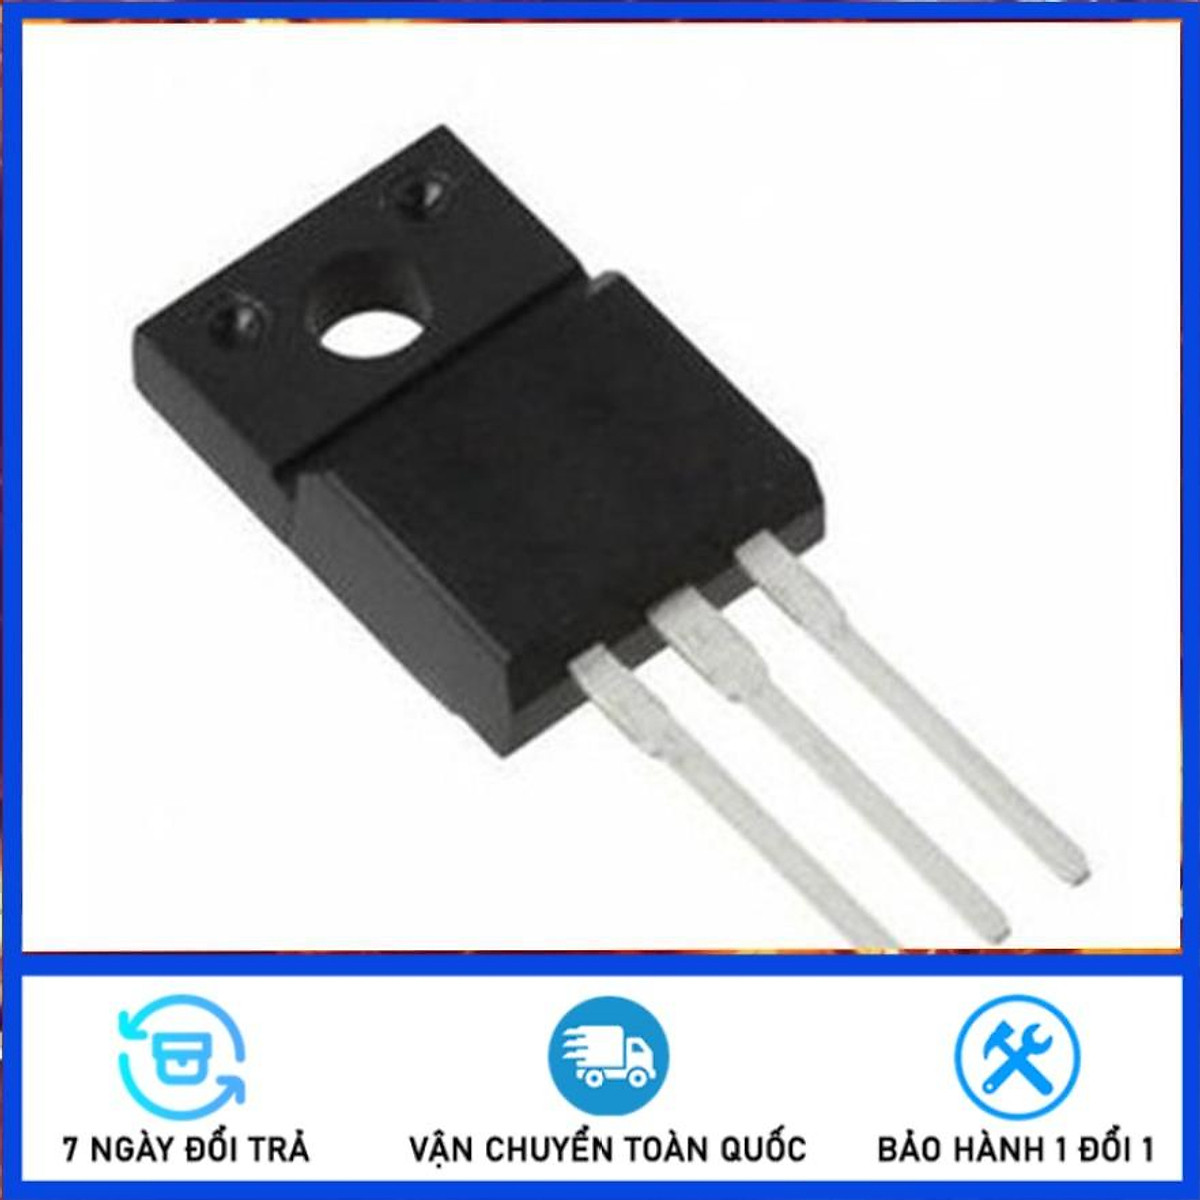 8N60 TO220 MOSFET N-CH 7.5A 600V